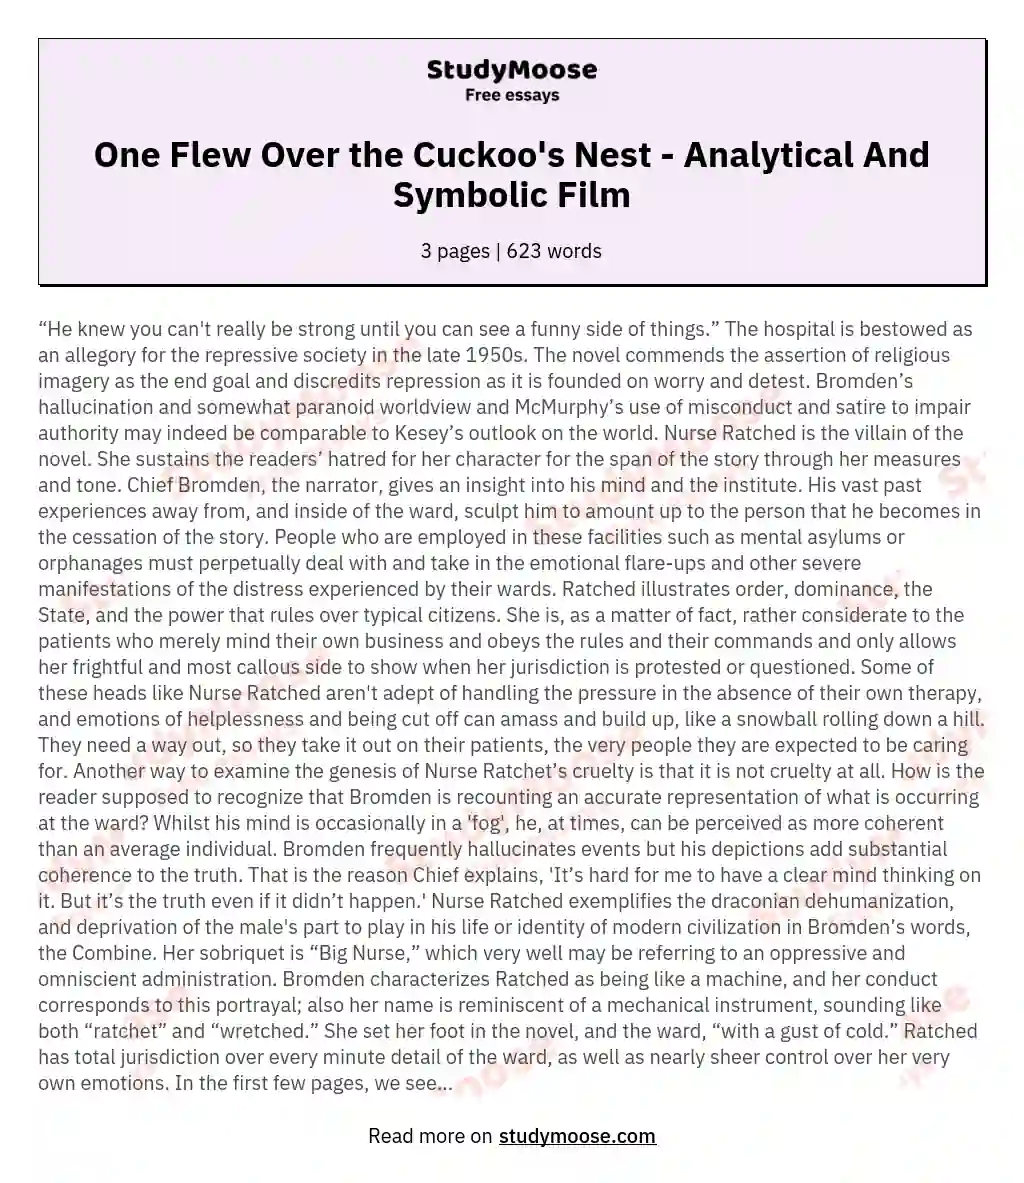 One Flew Over the Cuckoo's Nest - Analytical And Symbolic Film essay